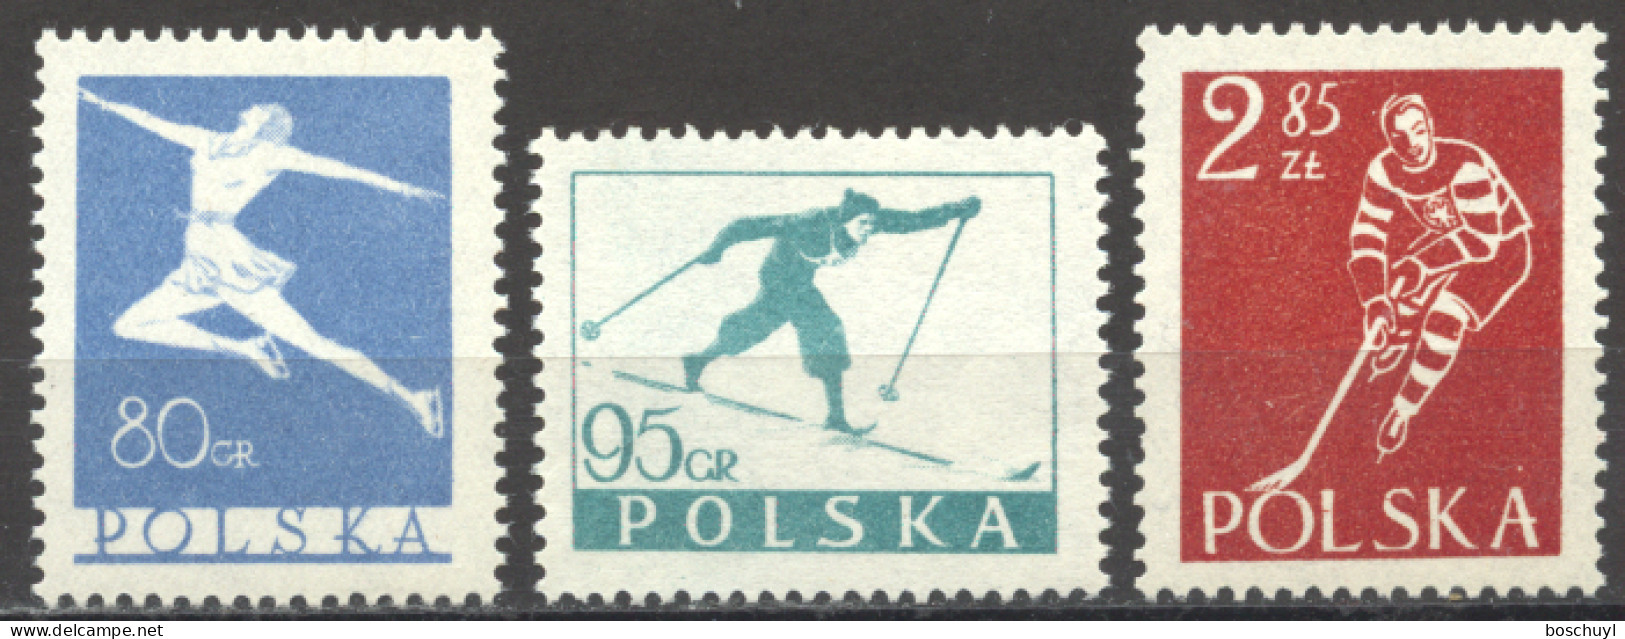 Poland, 1953, Winter Sports, Figure Skating, Skiing, Ice Hockey, MNH, Michel 831-833 - Unused Stamps